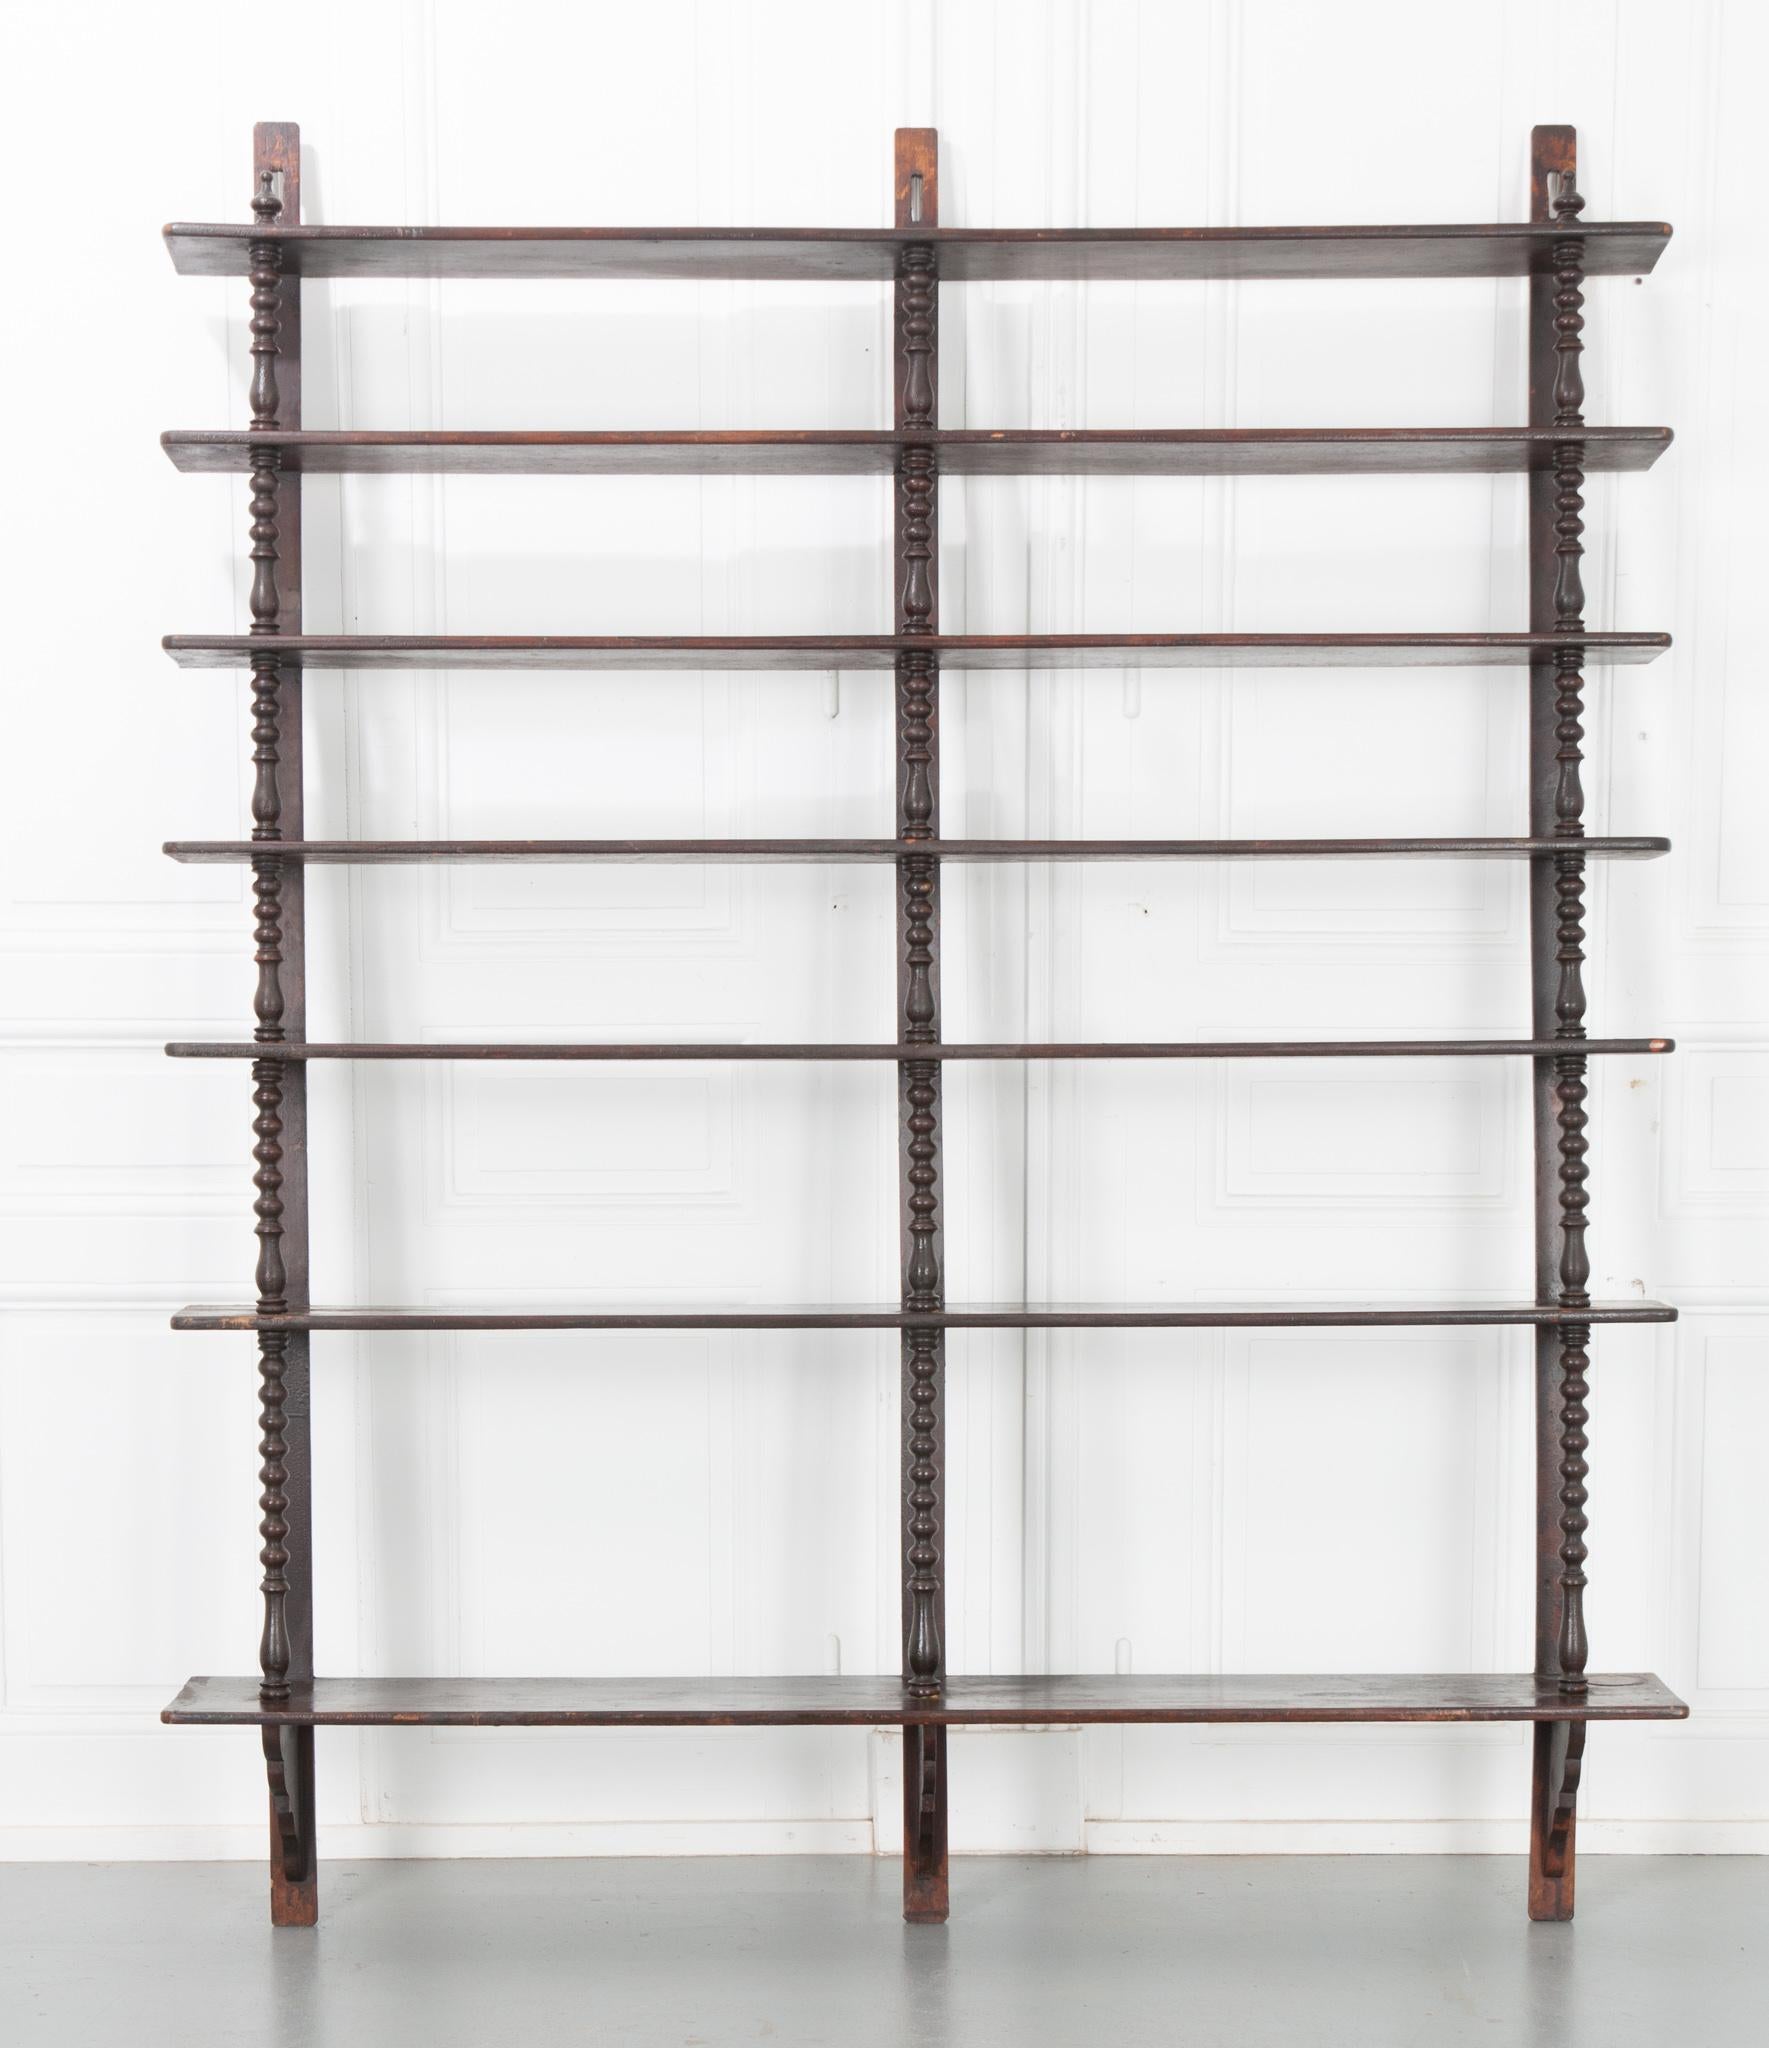 This wall shelf is massive! Made of solid oak it has seven shelves for a ton of storage or display surface area. Standing at over 6 feet tall it’s a perfect piece if you’re looking for floor-to-ceiling shelves. The turned wooden supports in the